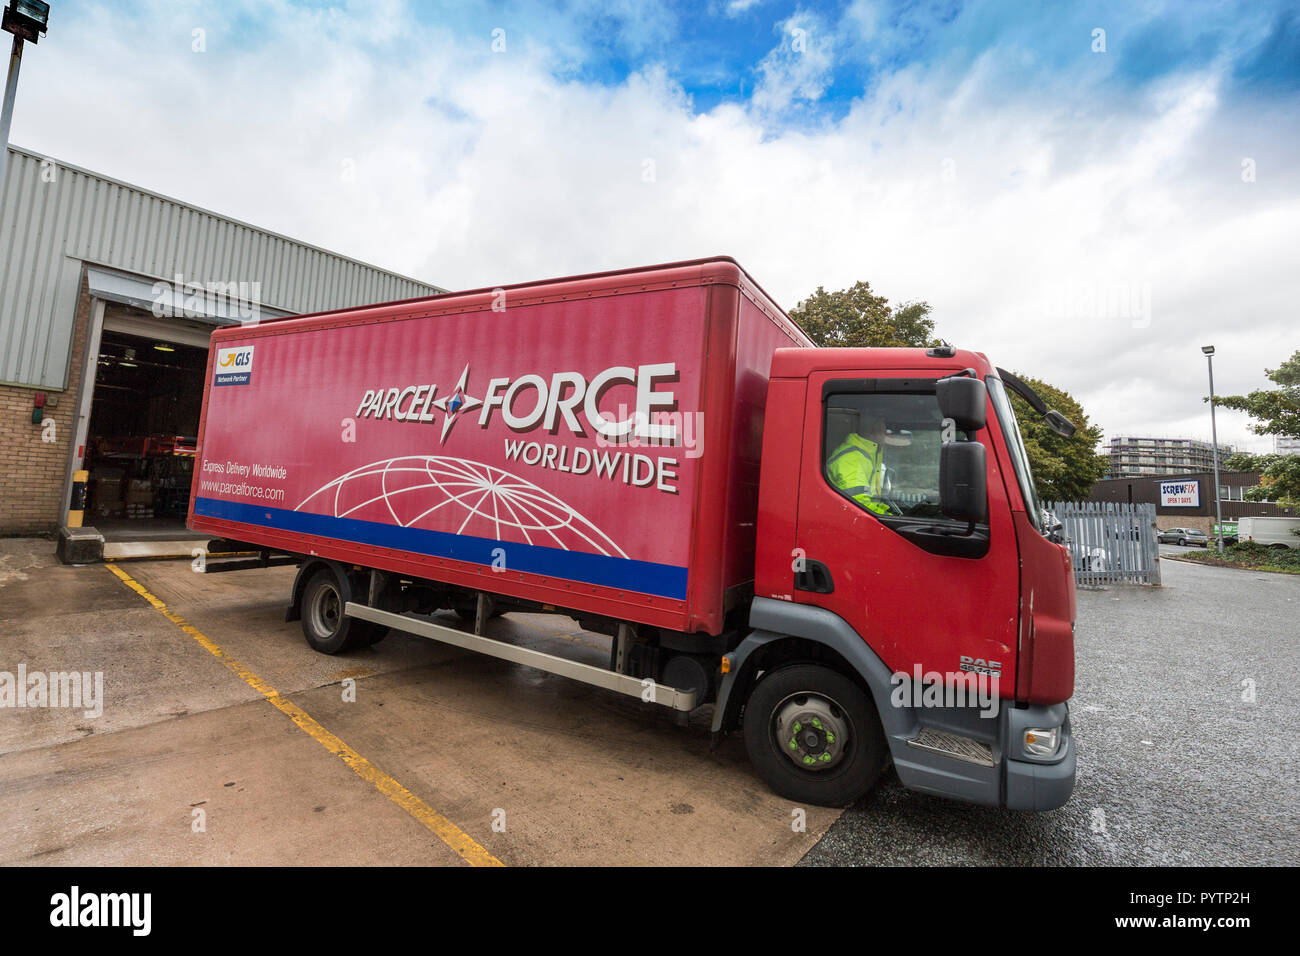 Parcelforce Worldwide Manchester , Picadilly Trading Estate. Furgone al deposito. Foto Stock